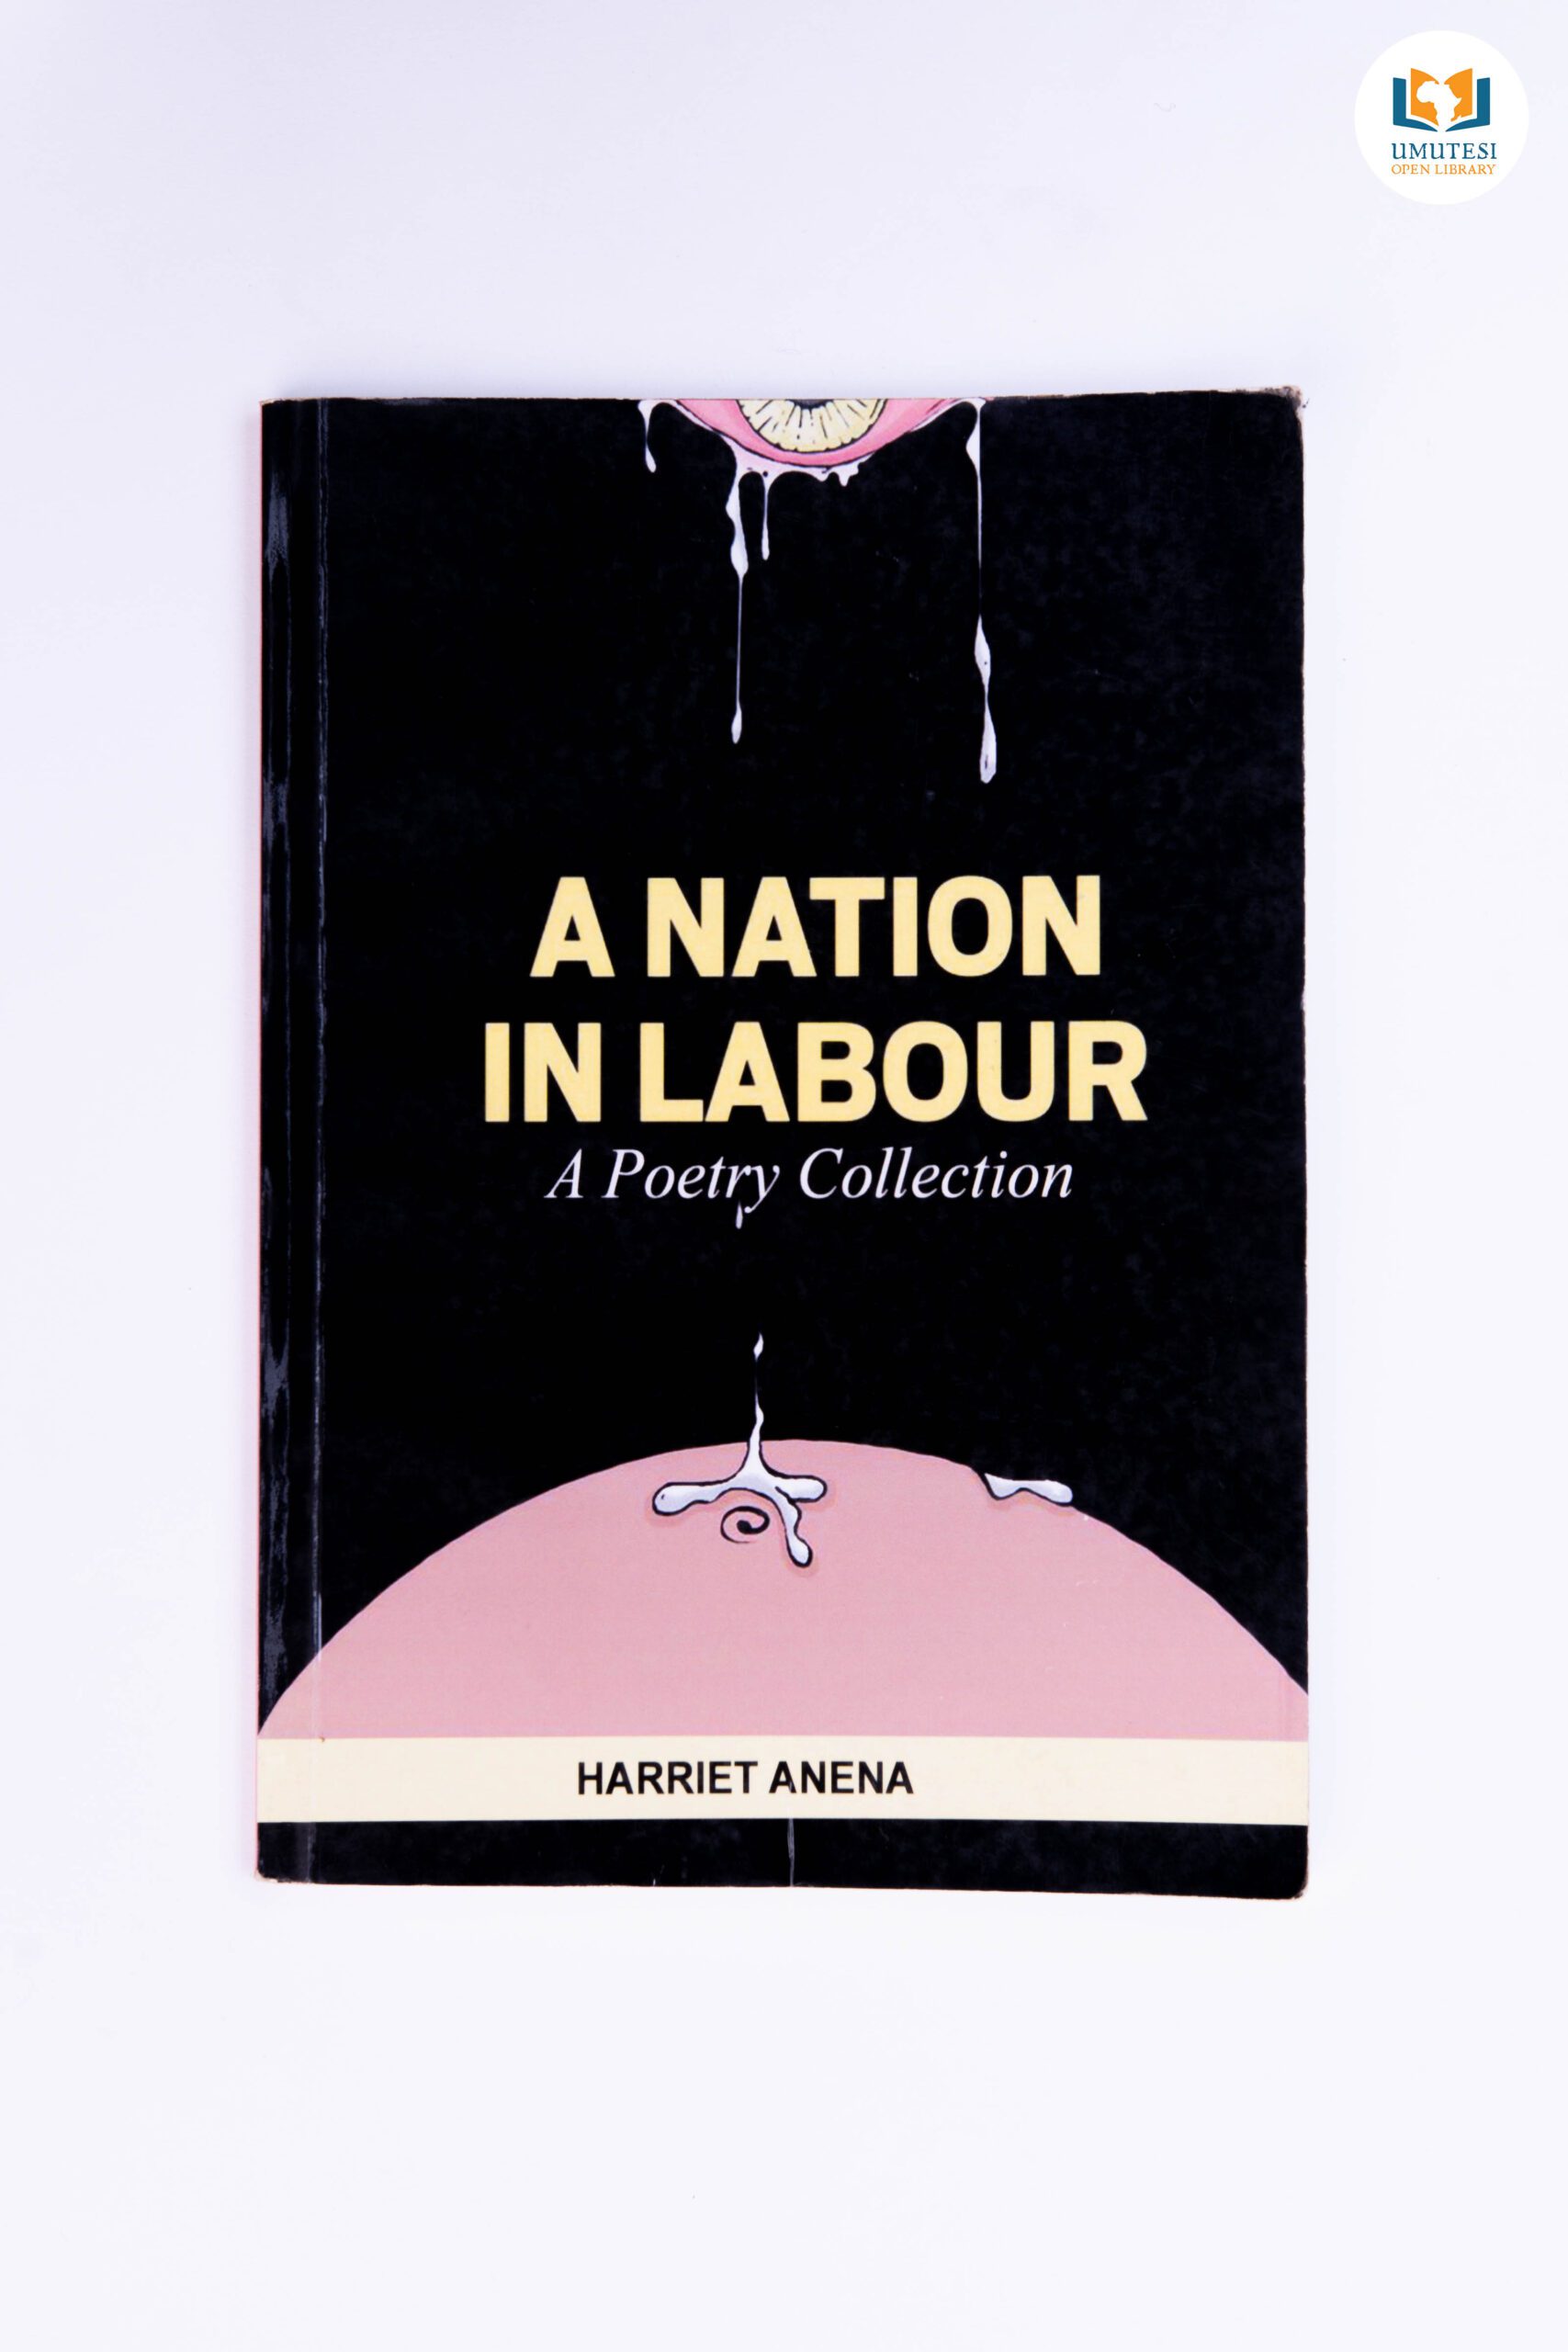 A Nation In Labour by Harriet Anena